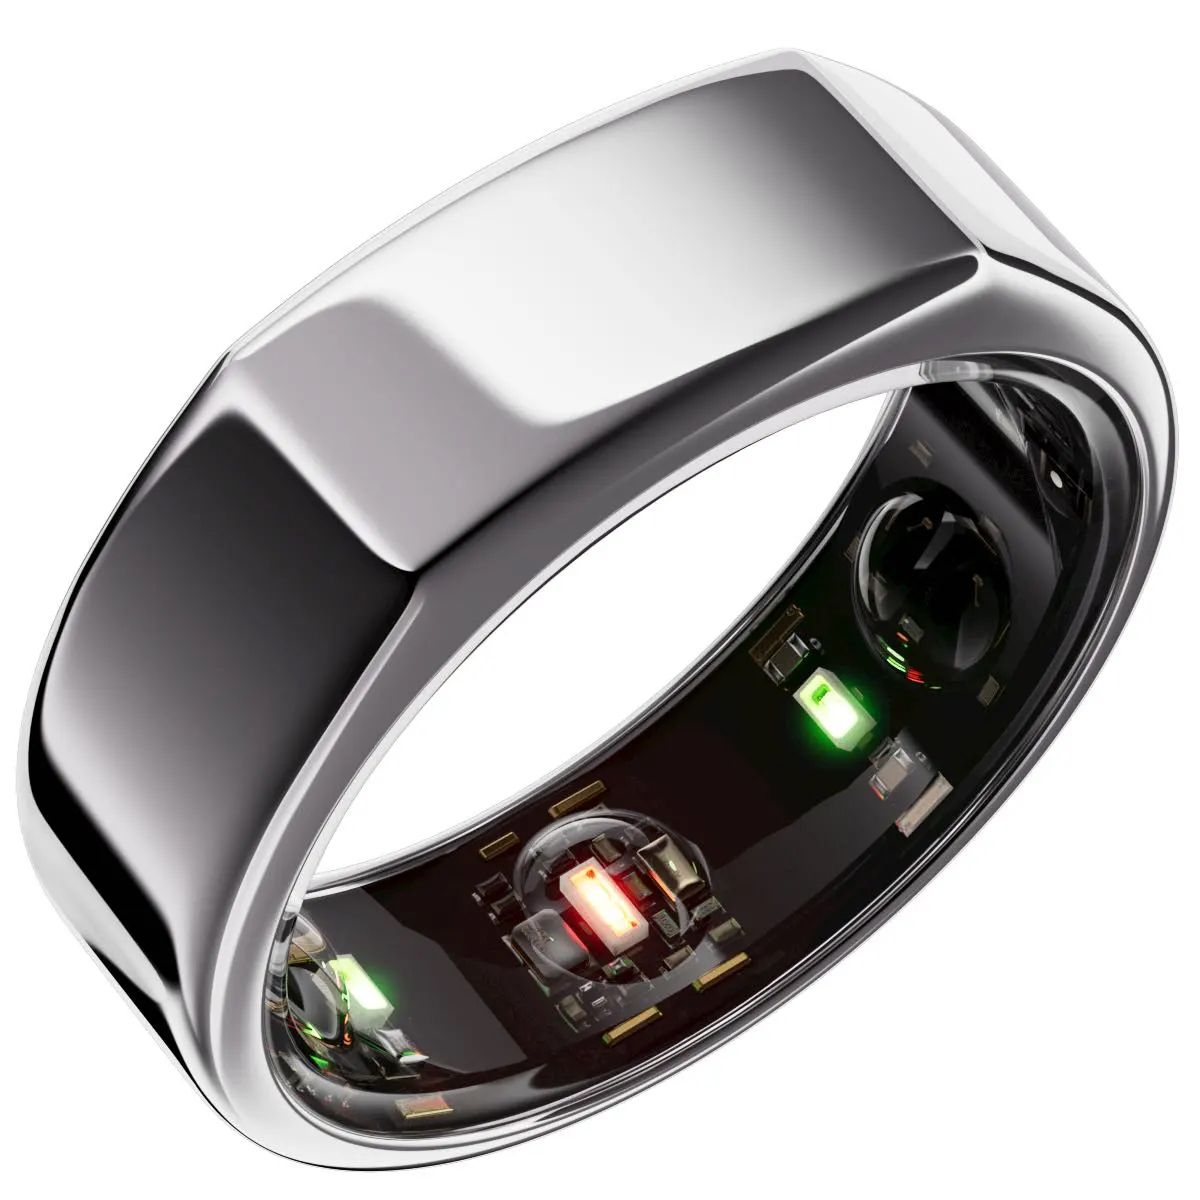 A smart ring for improved health monitoring